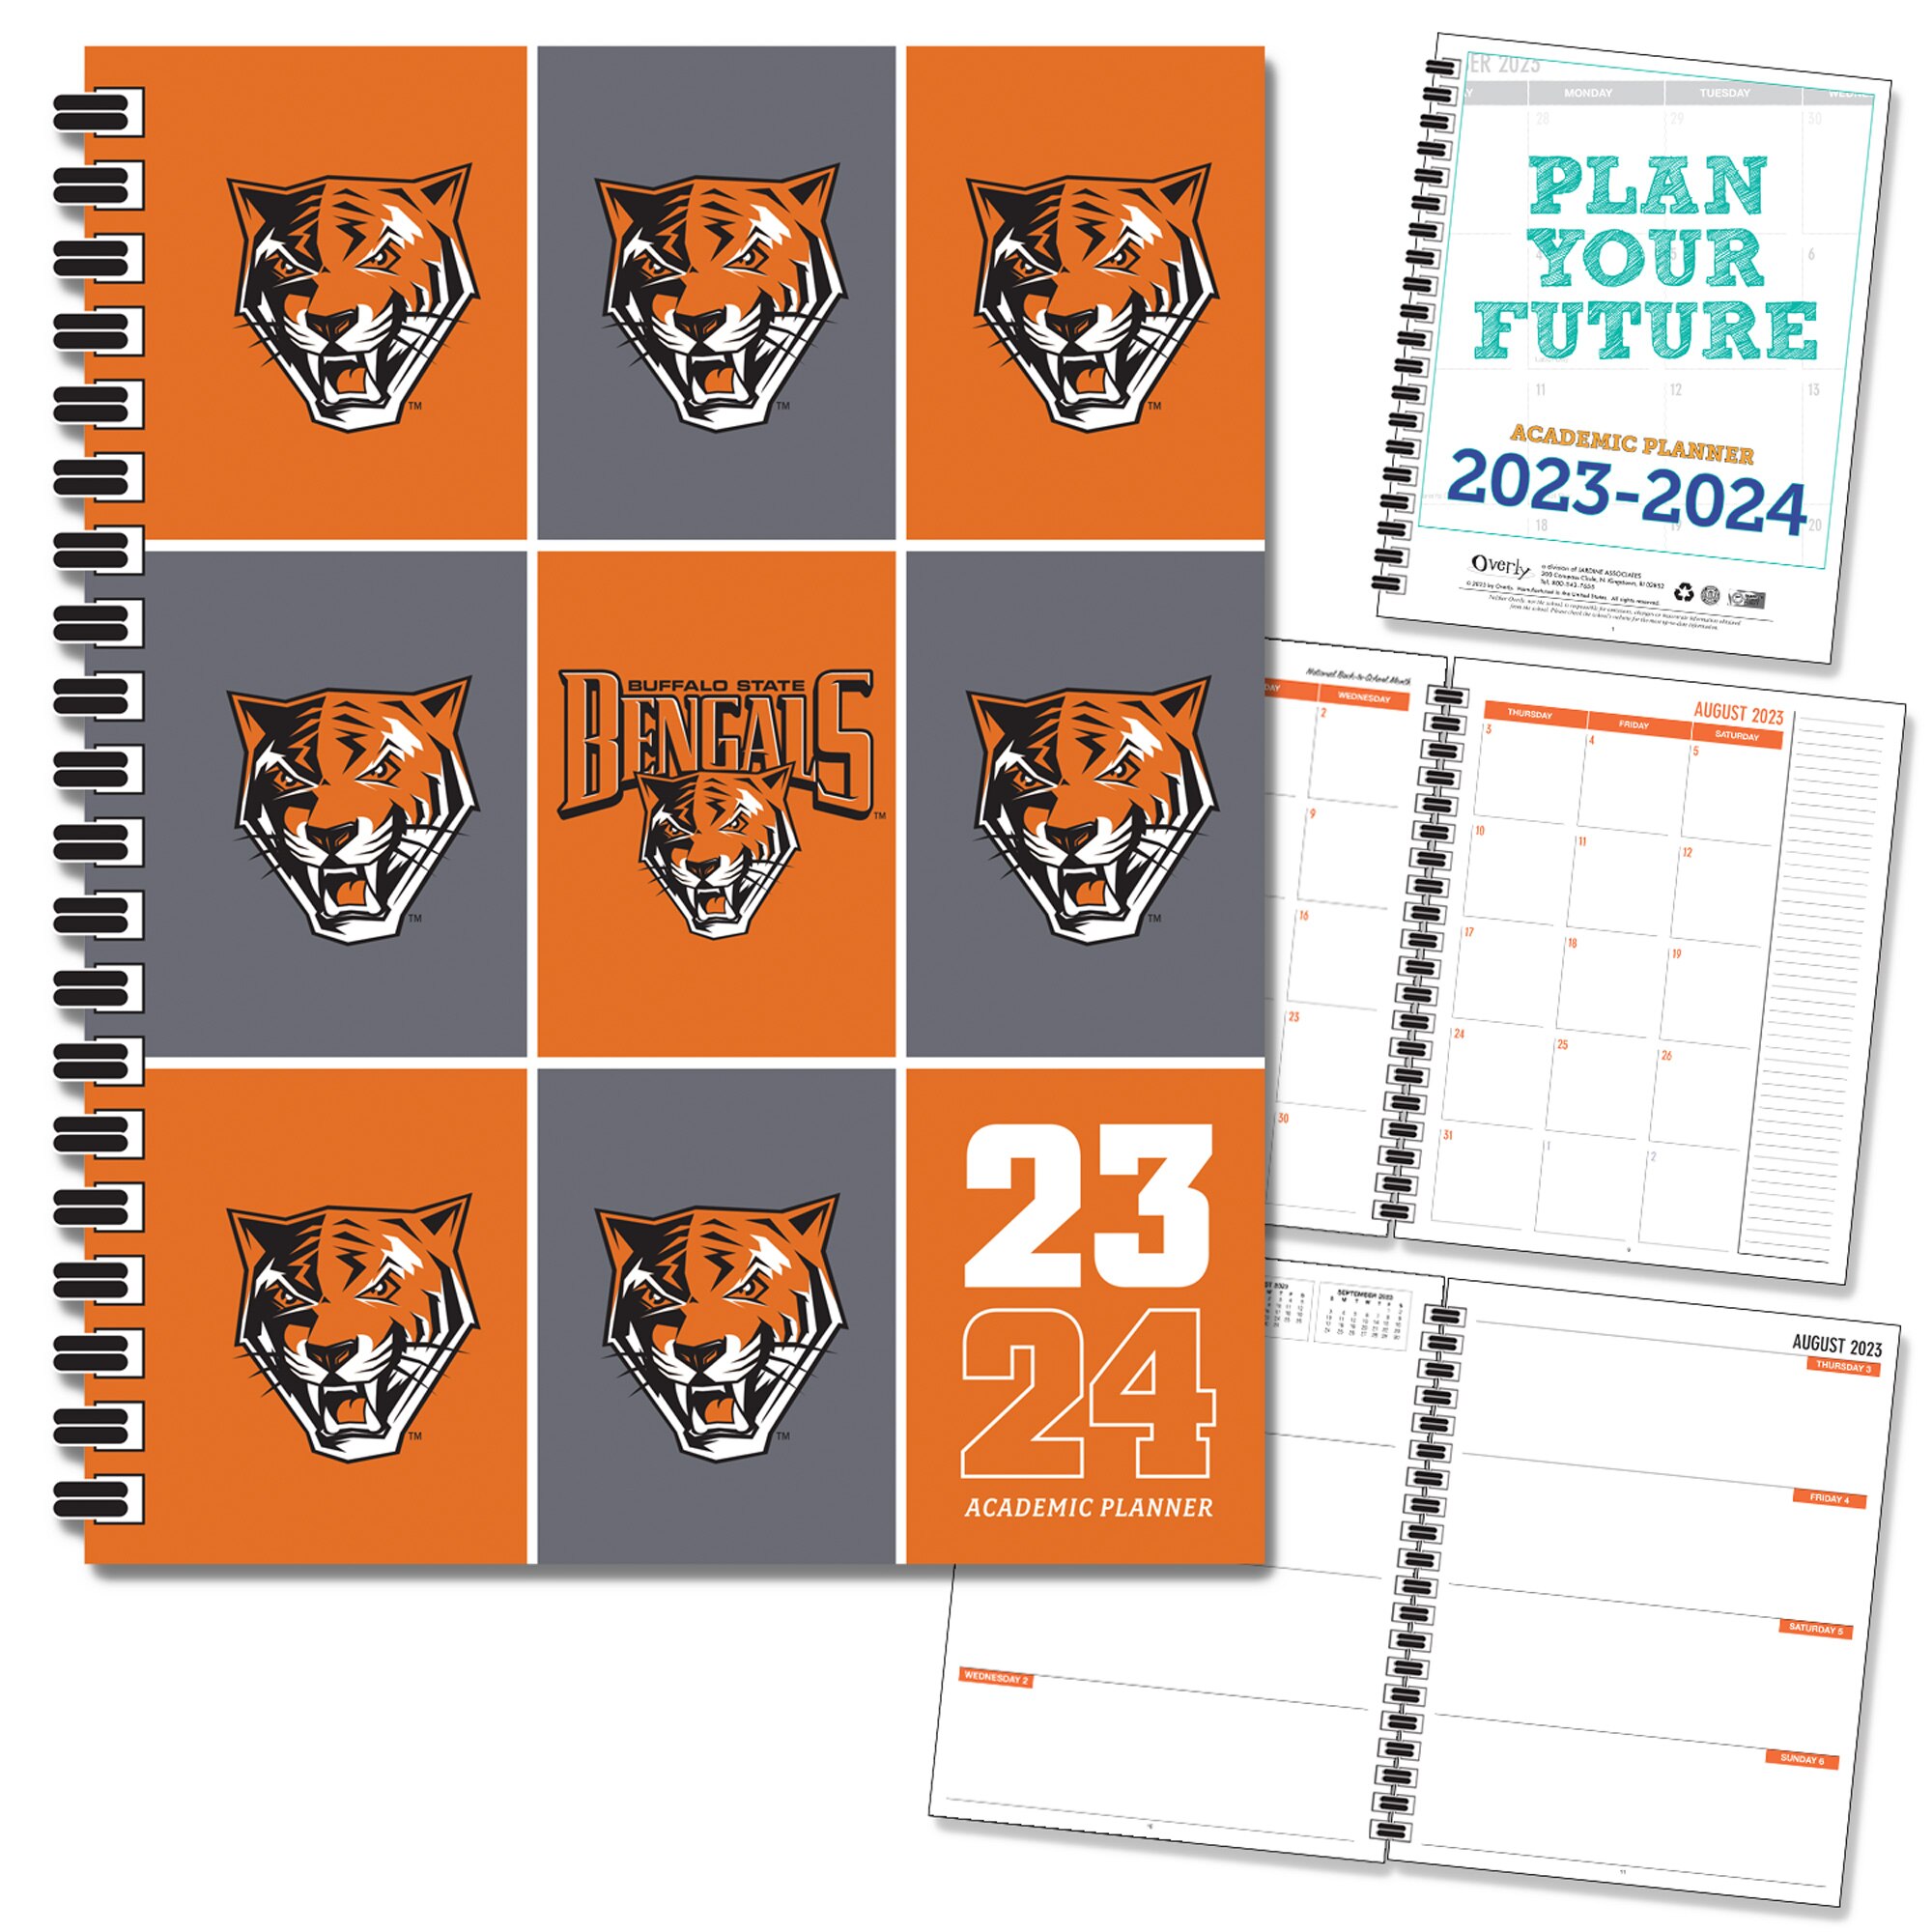 FY 24 Traditional Soft Touch Spot Varnish - Mascot Imprinted Planner 23-24 AY 7x9